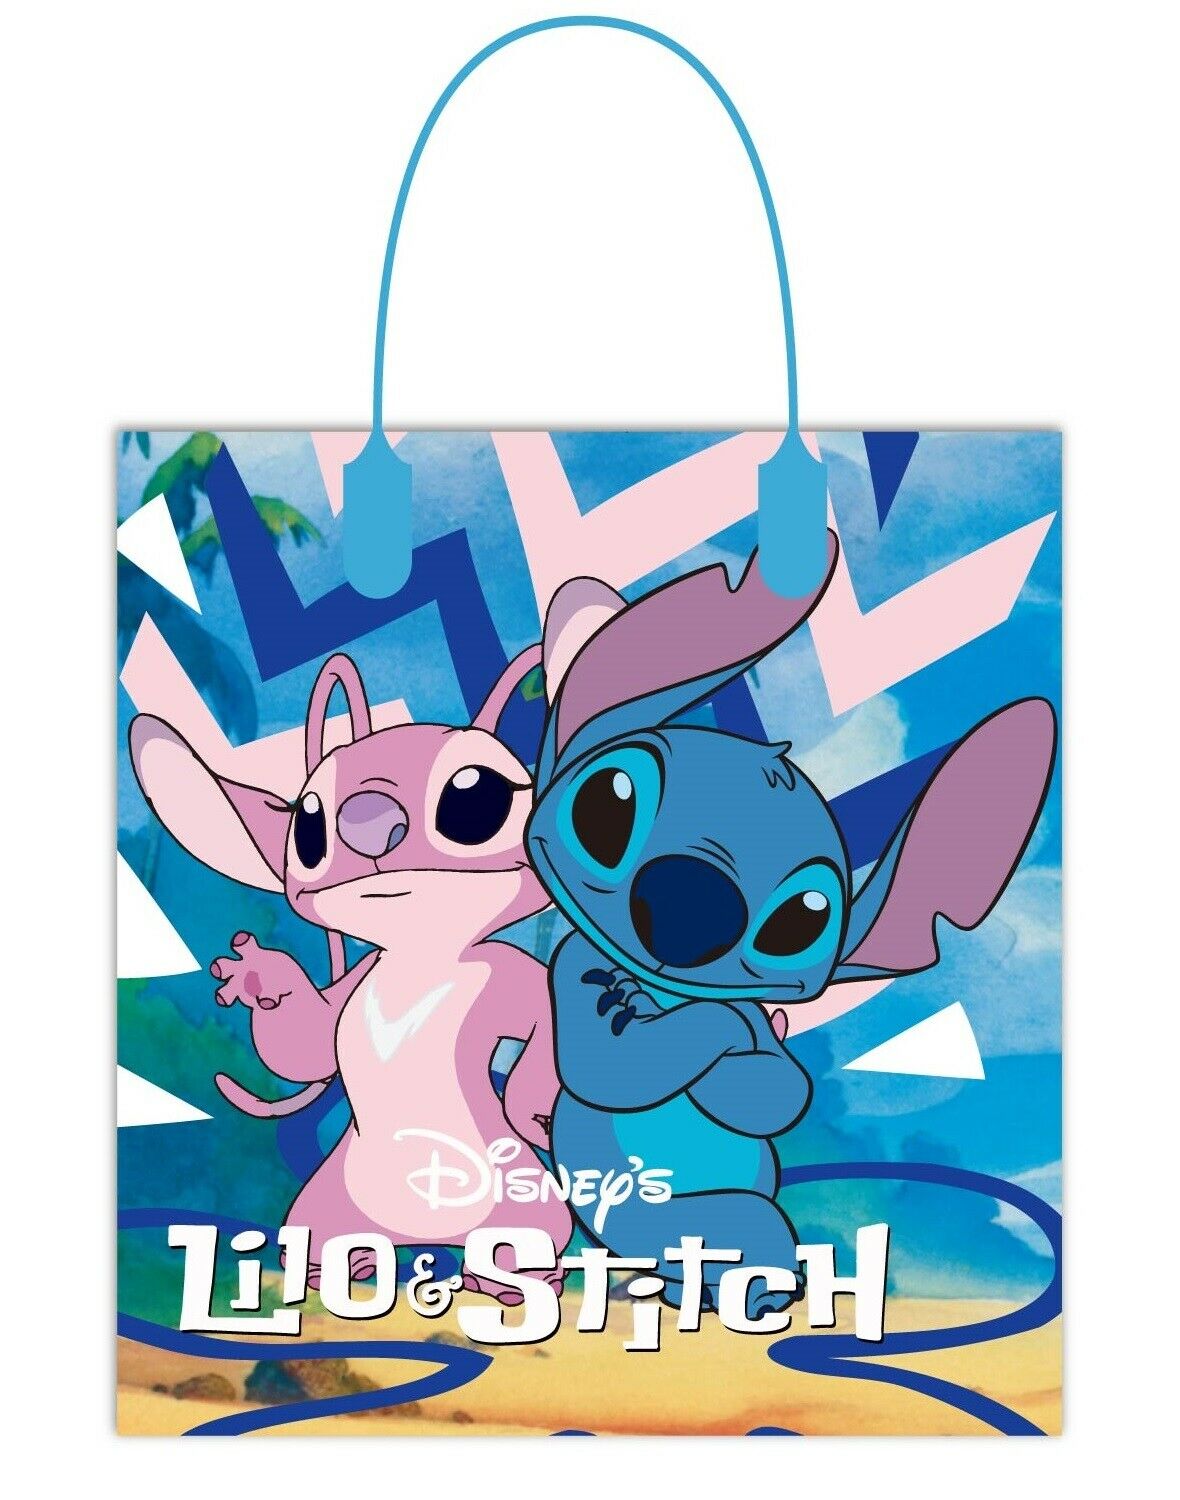 12 Pieces Lilo and Stitch Party Favor 6 inch Goodie Gift Birthday Loot Goody Bag, Women's